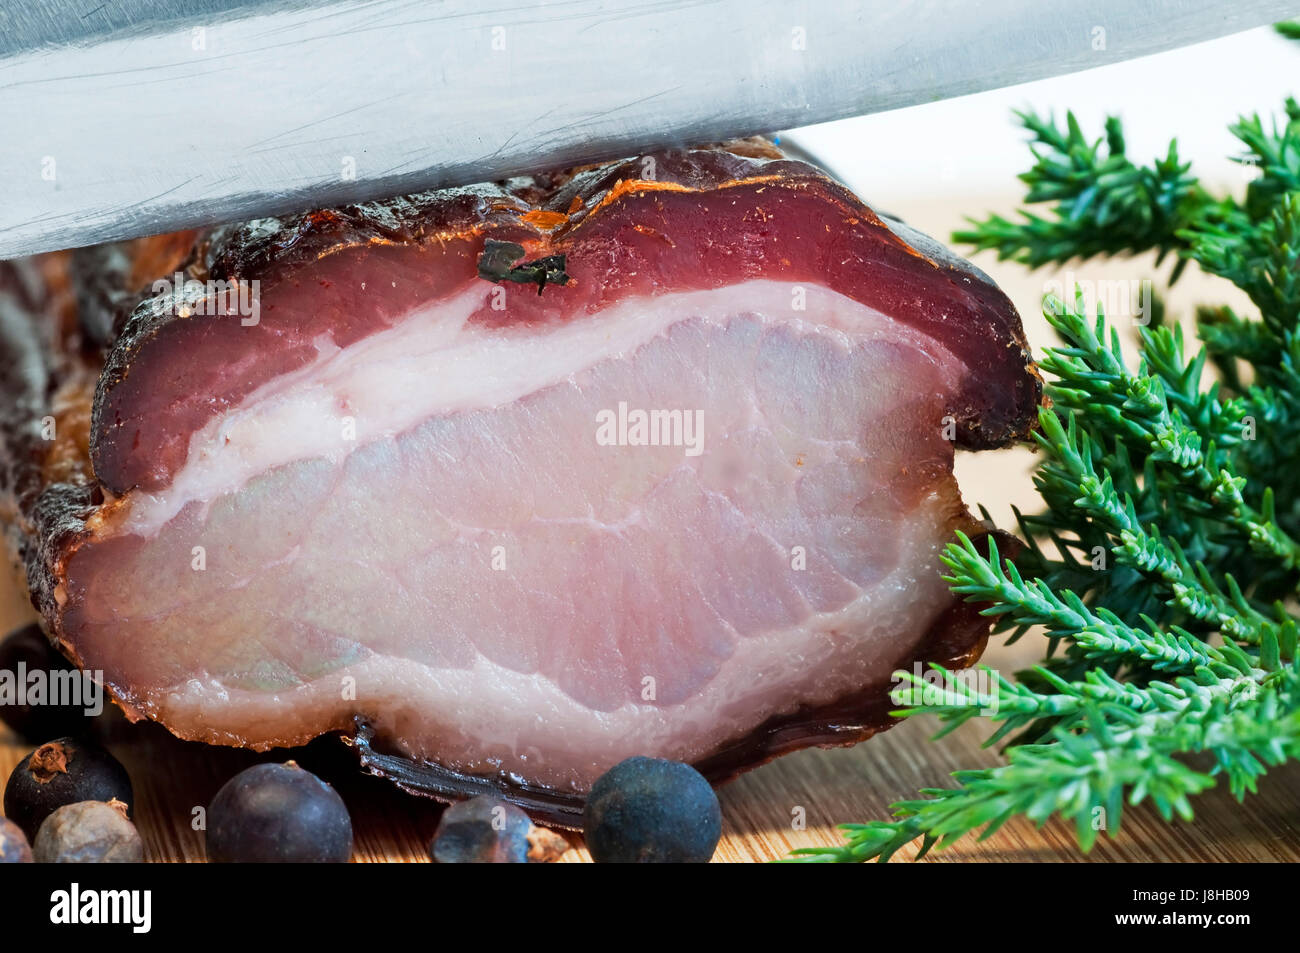 black forest, ham, smoked, smoke, speciality, bacon, meat, sausage, alps, Stock Photo